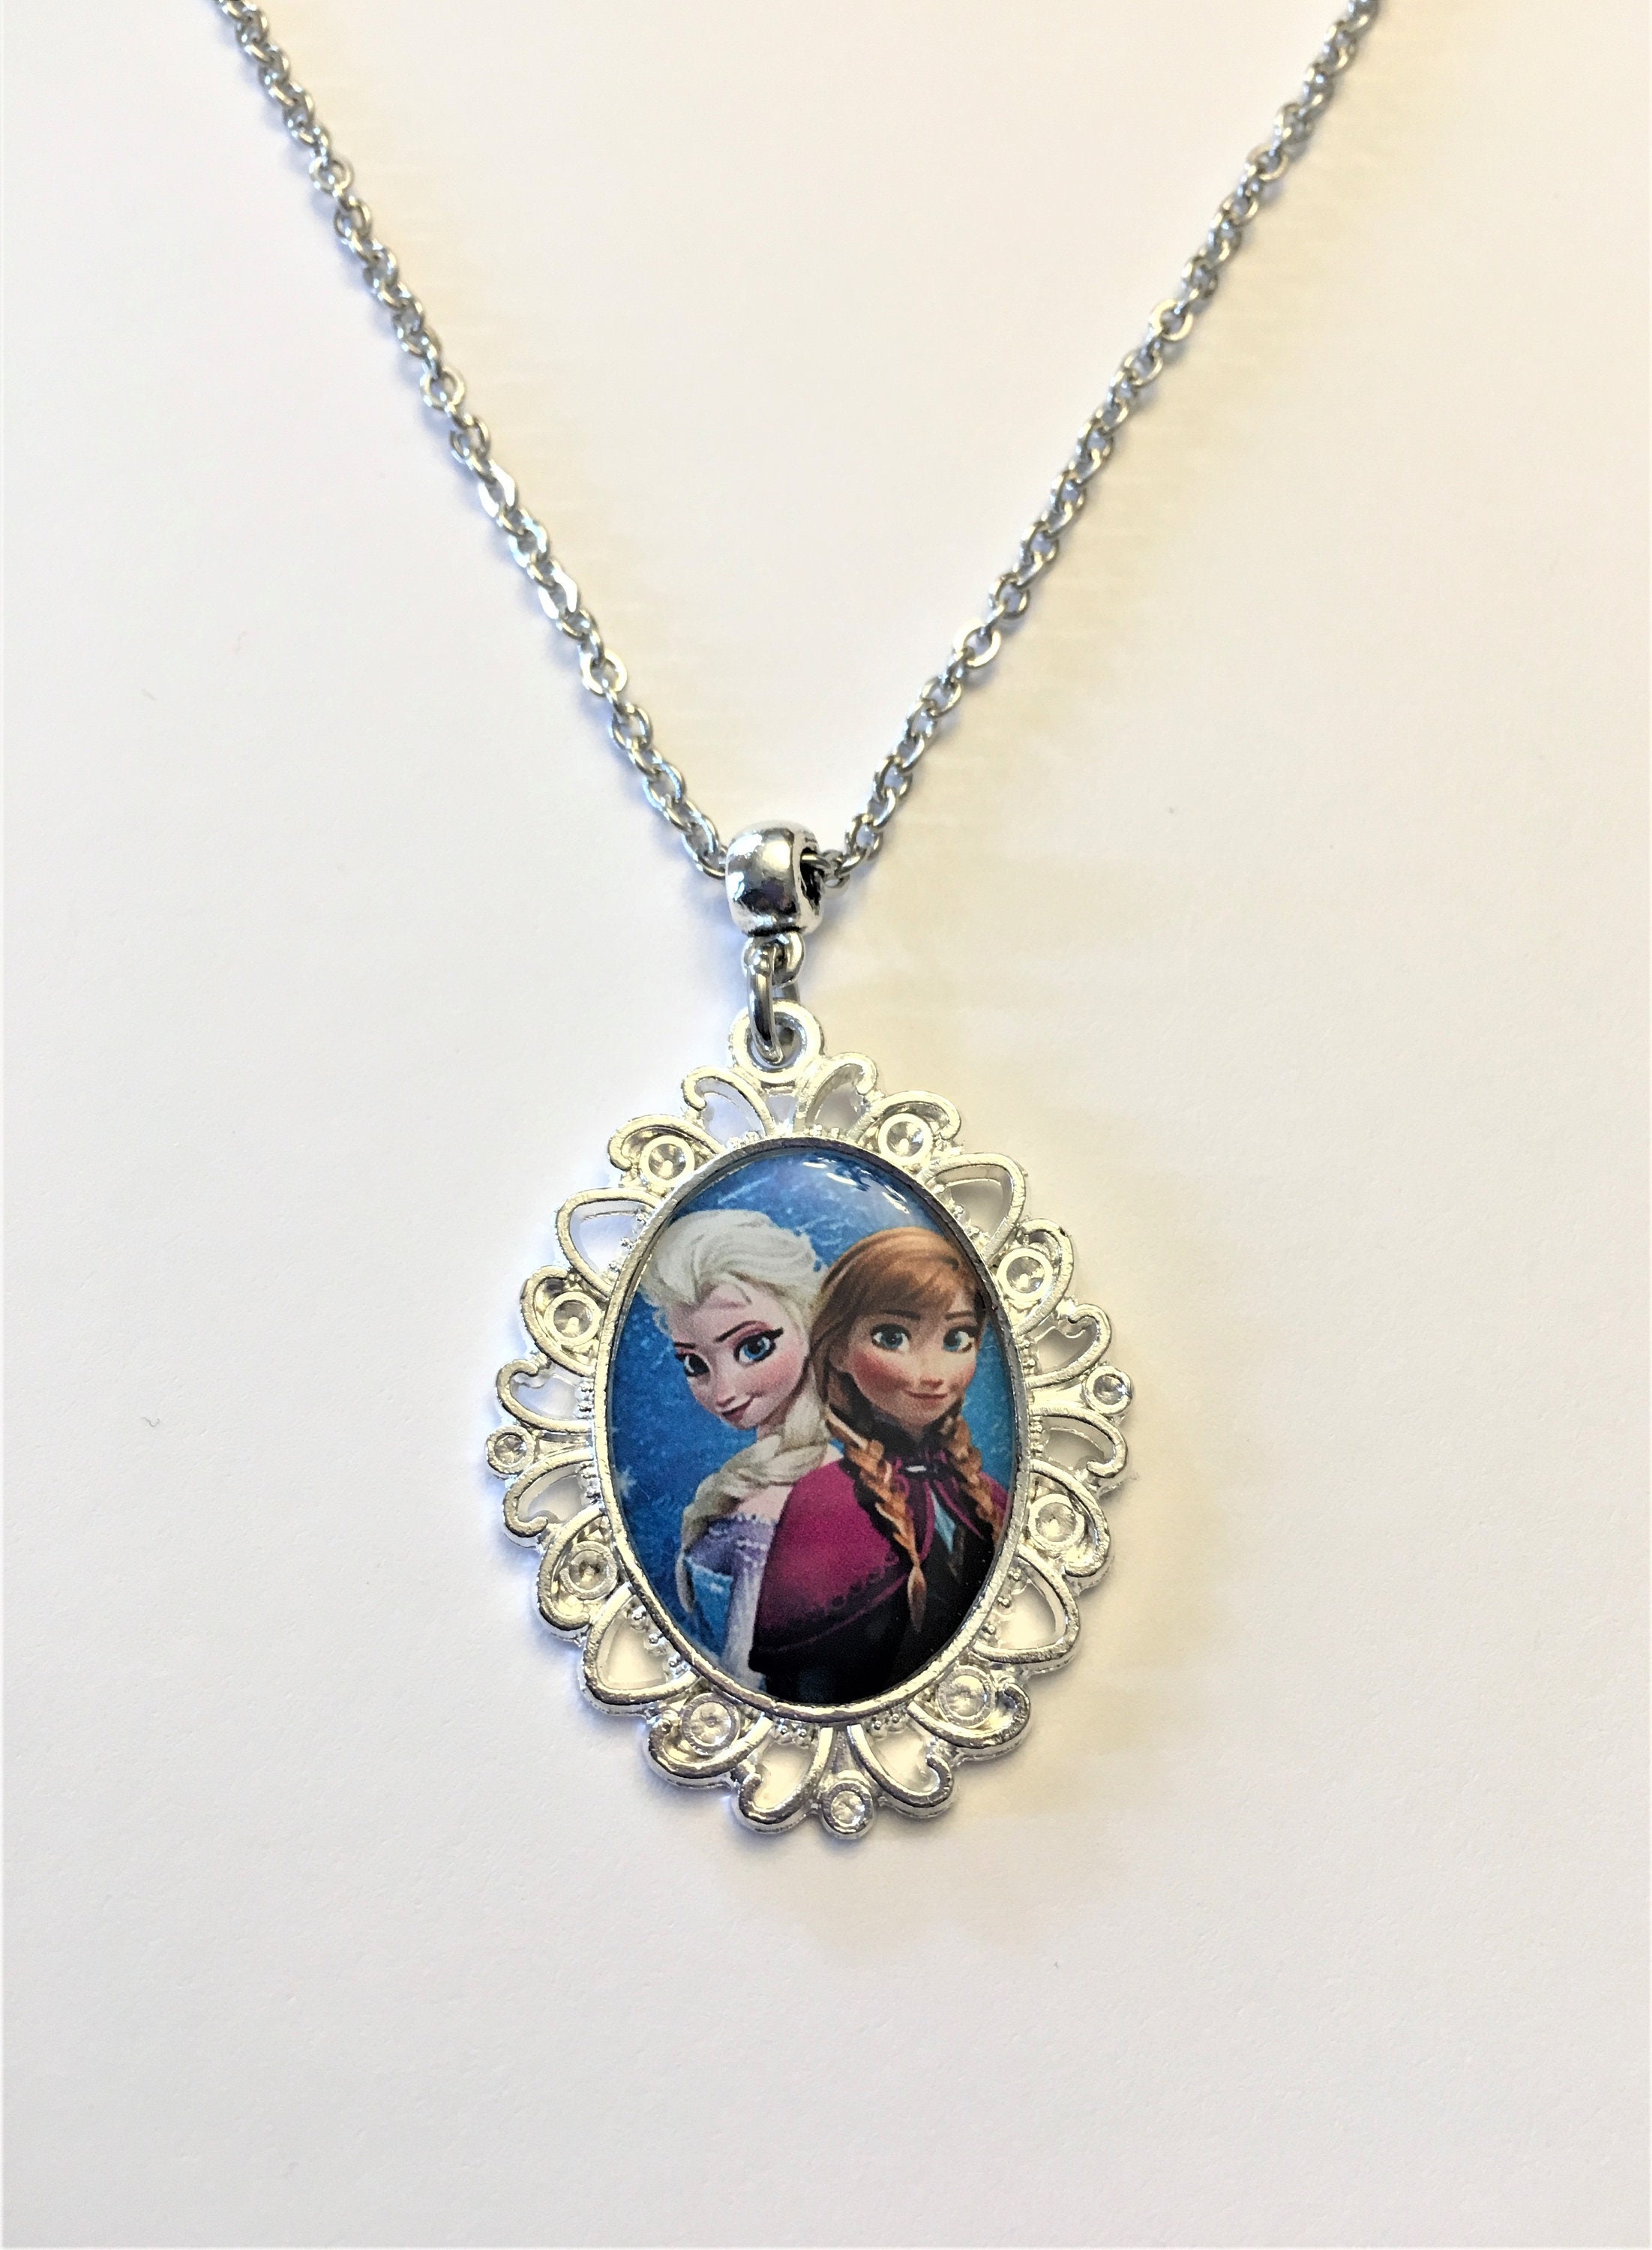 Buy Disney Frozen 2 Elsa Necklace 5th Element Feature Necklace Online at  Lowest Price Ever in India | Check Reviews & Ratings - Shop The World